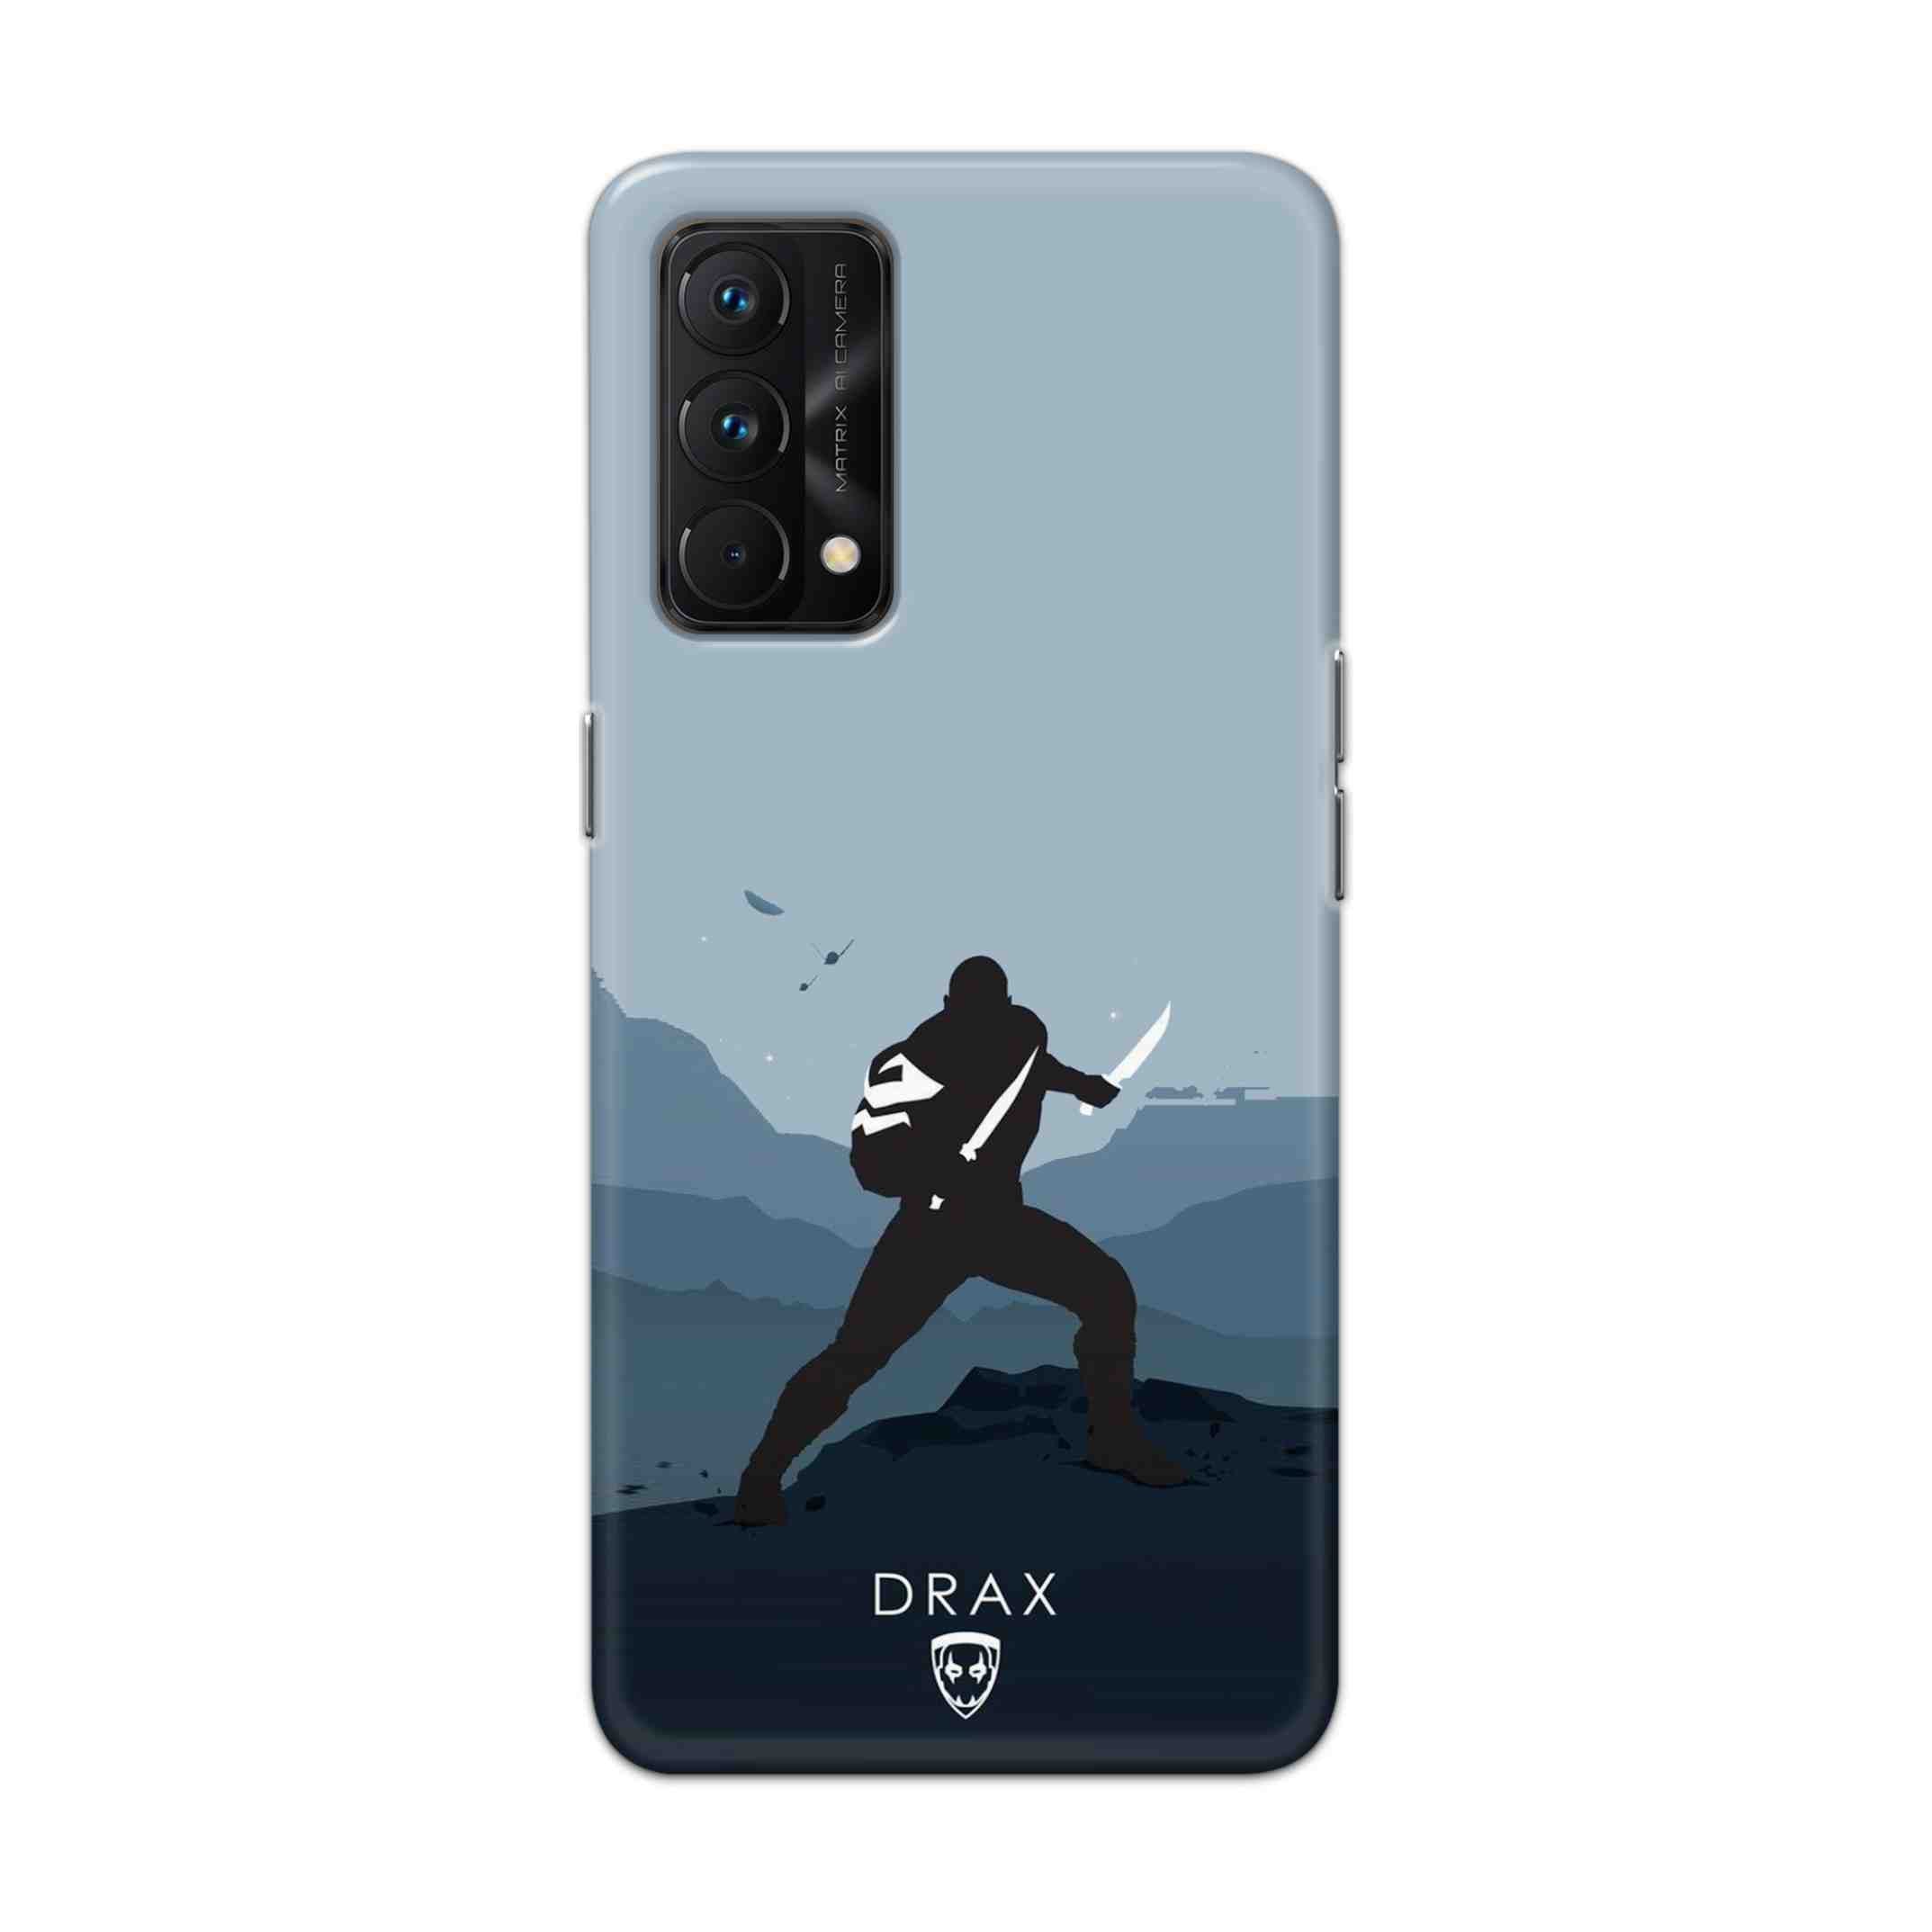 Buy Drax Hard Back Mobile Phone Case Cover For Realme GT Master Online